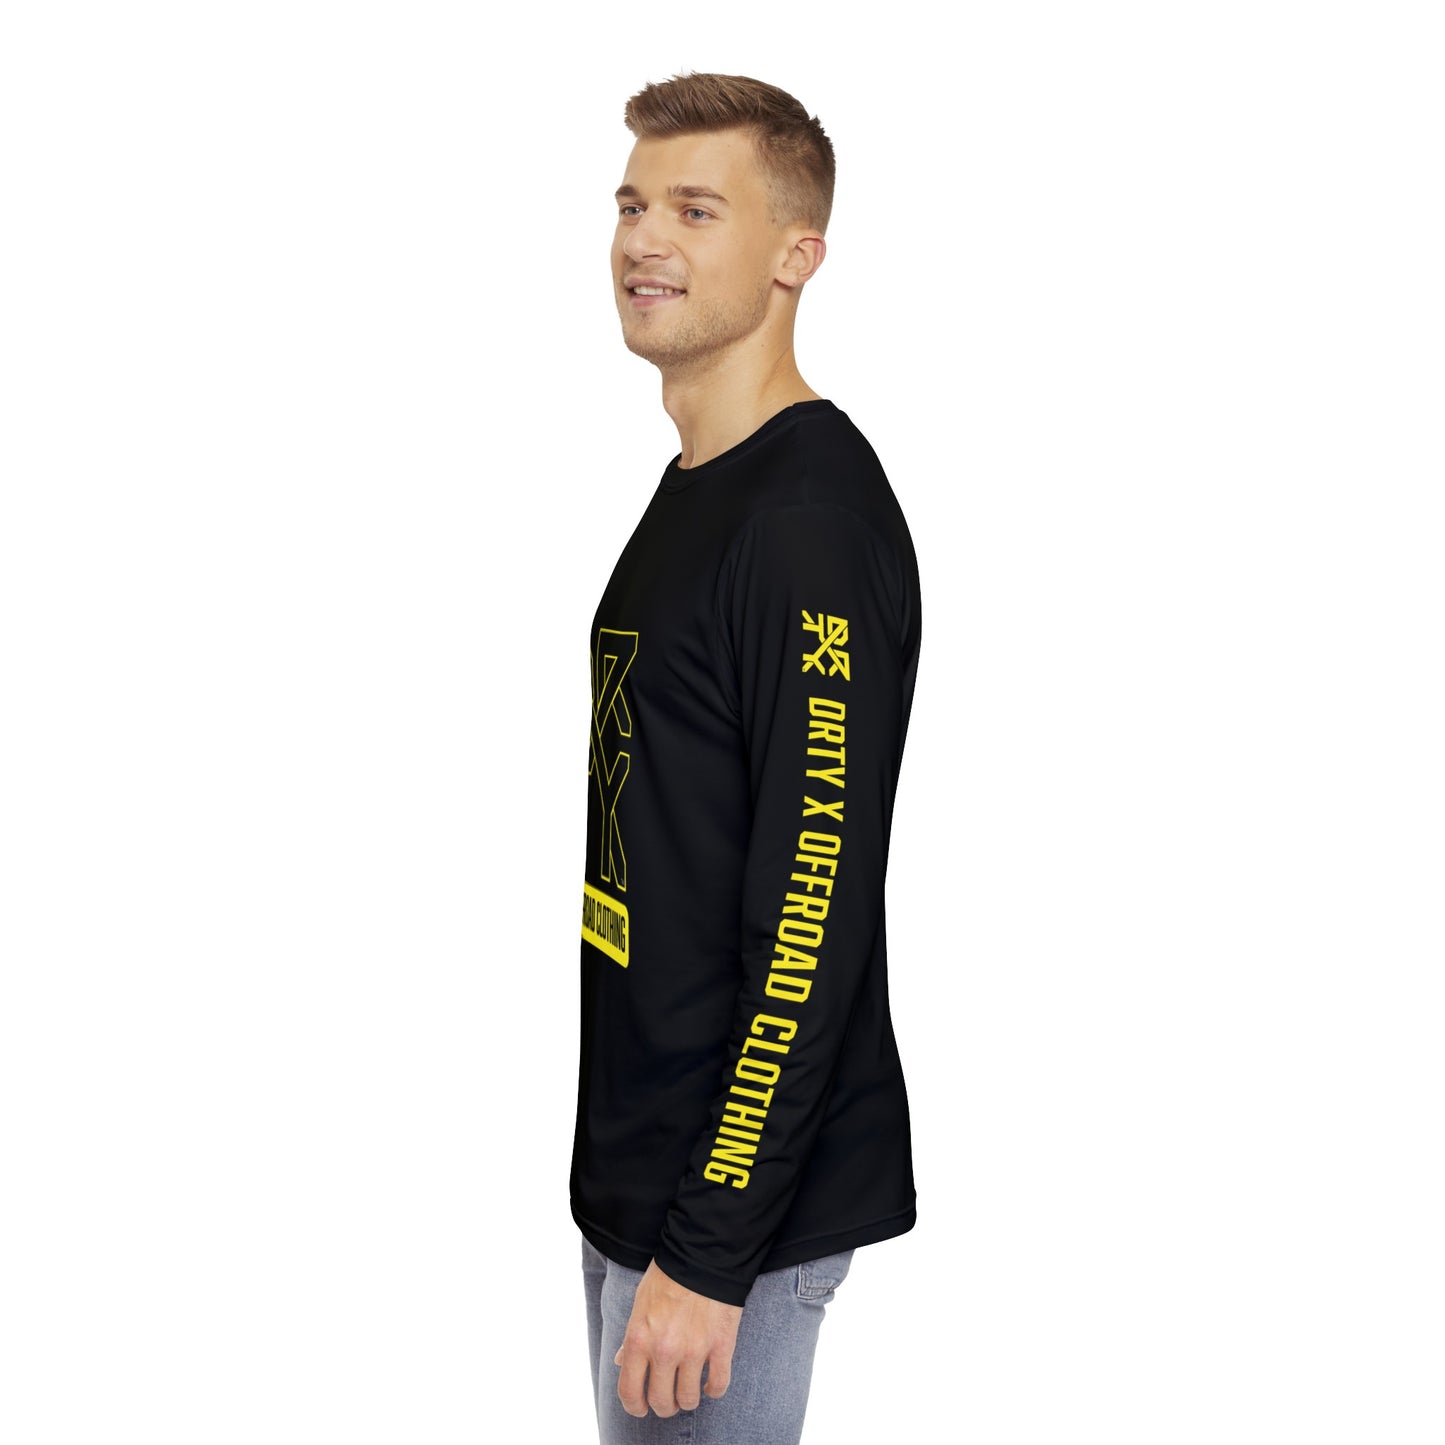 This image showcases the side view of a man wearing a long sleeve shirt with a small DRTY X Logo on the left sleeve  of the shirt with text that says DRTY X Offroad Clothing.